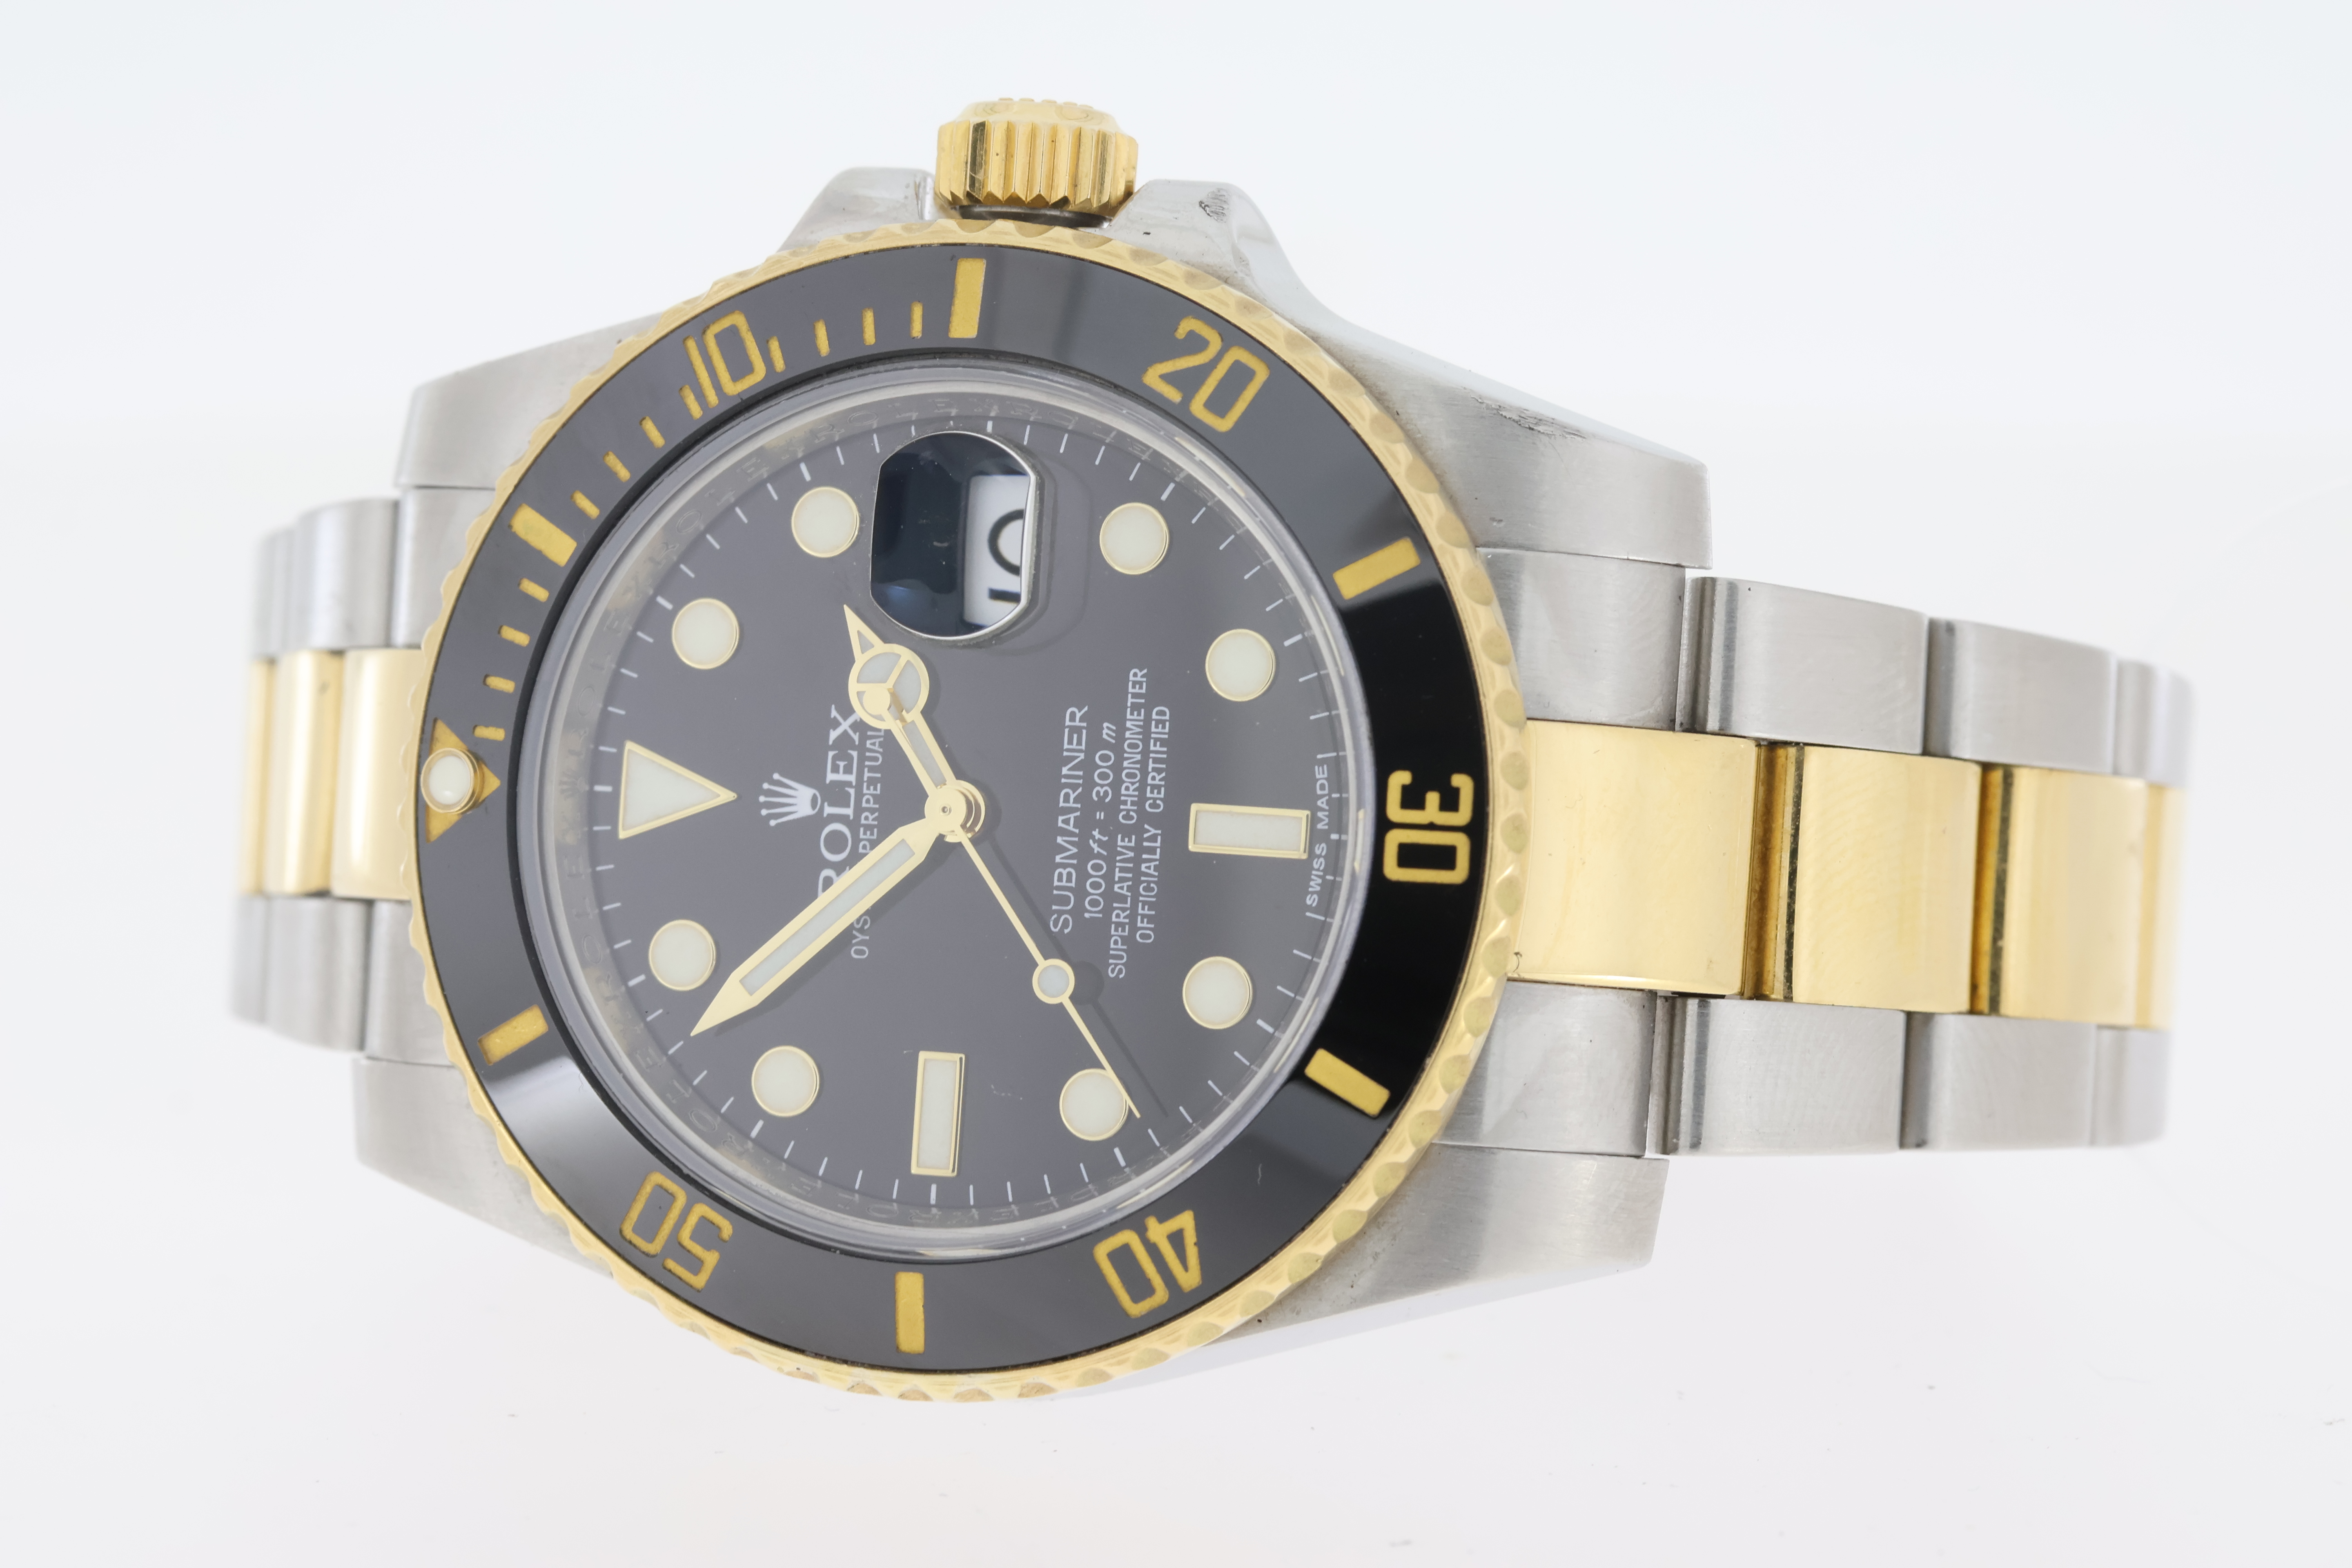 Rolex Submariner Date Reference 116613LN Steel and Gold - Image 3 of 8